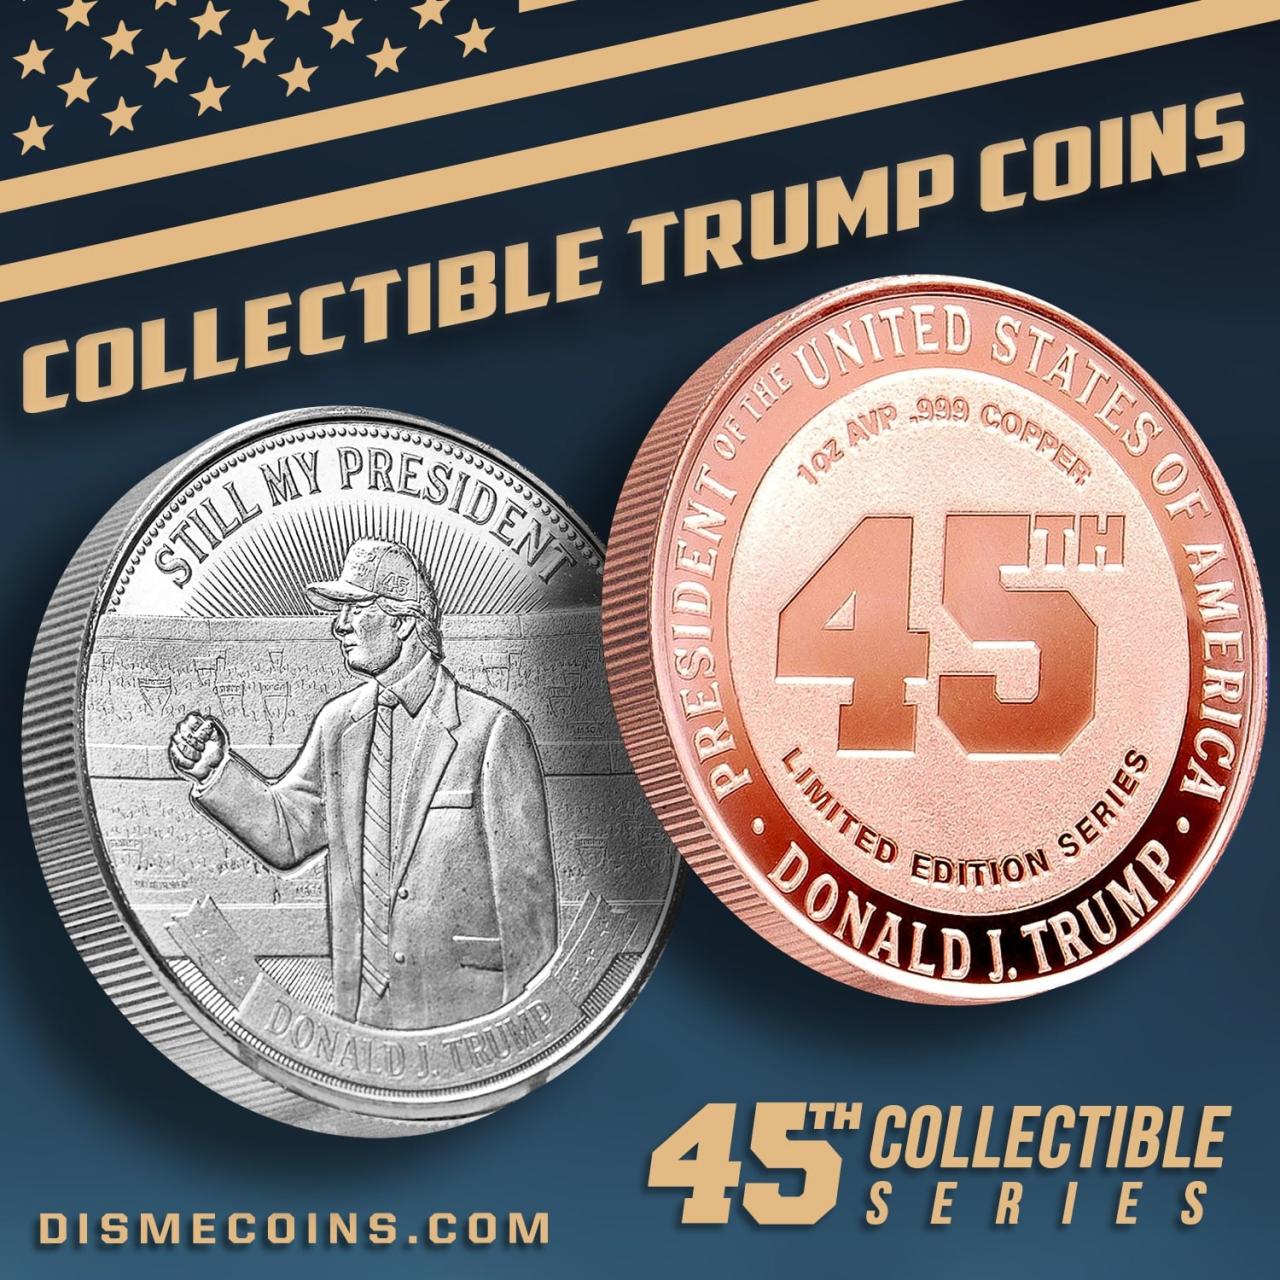 Limited Time Offer: 99.9% Pure Silver Collector Trump Coins Discounted With Code TGP